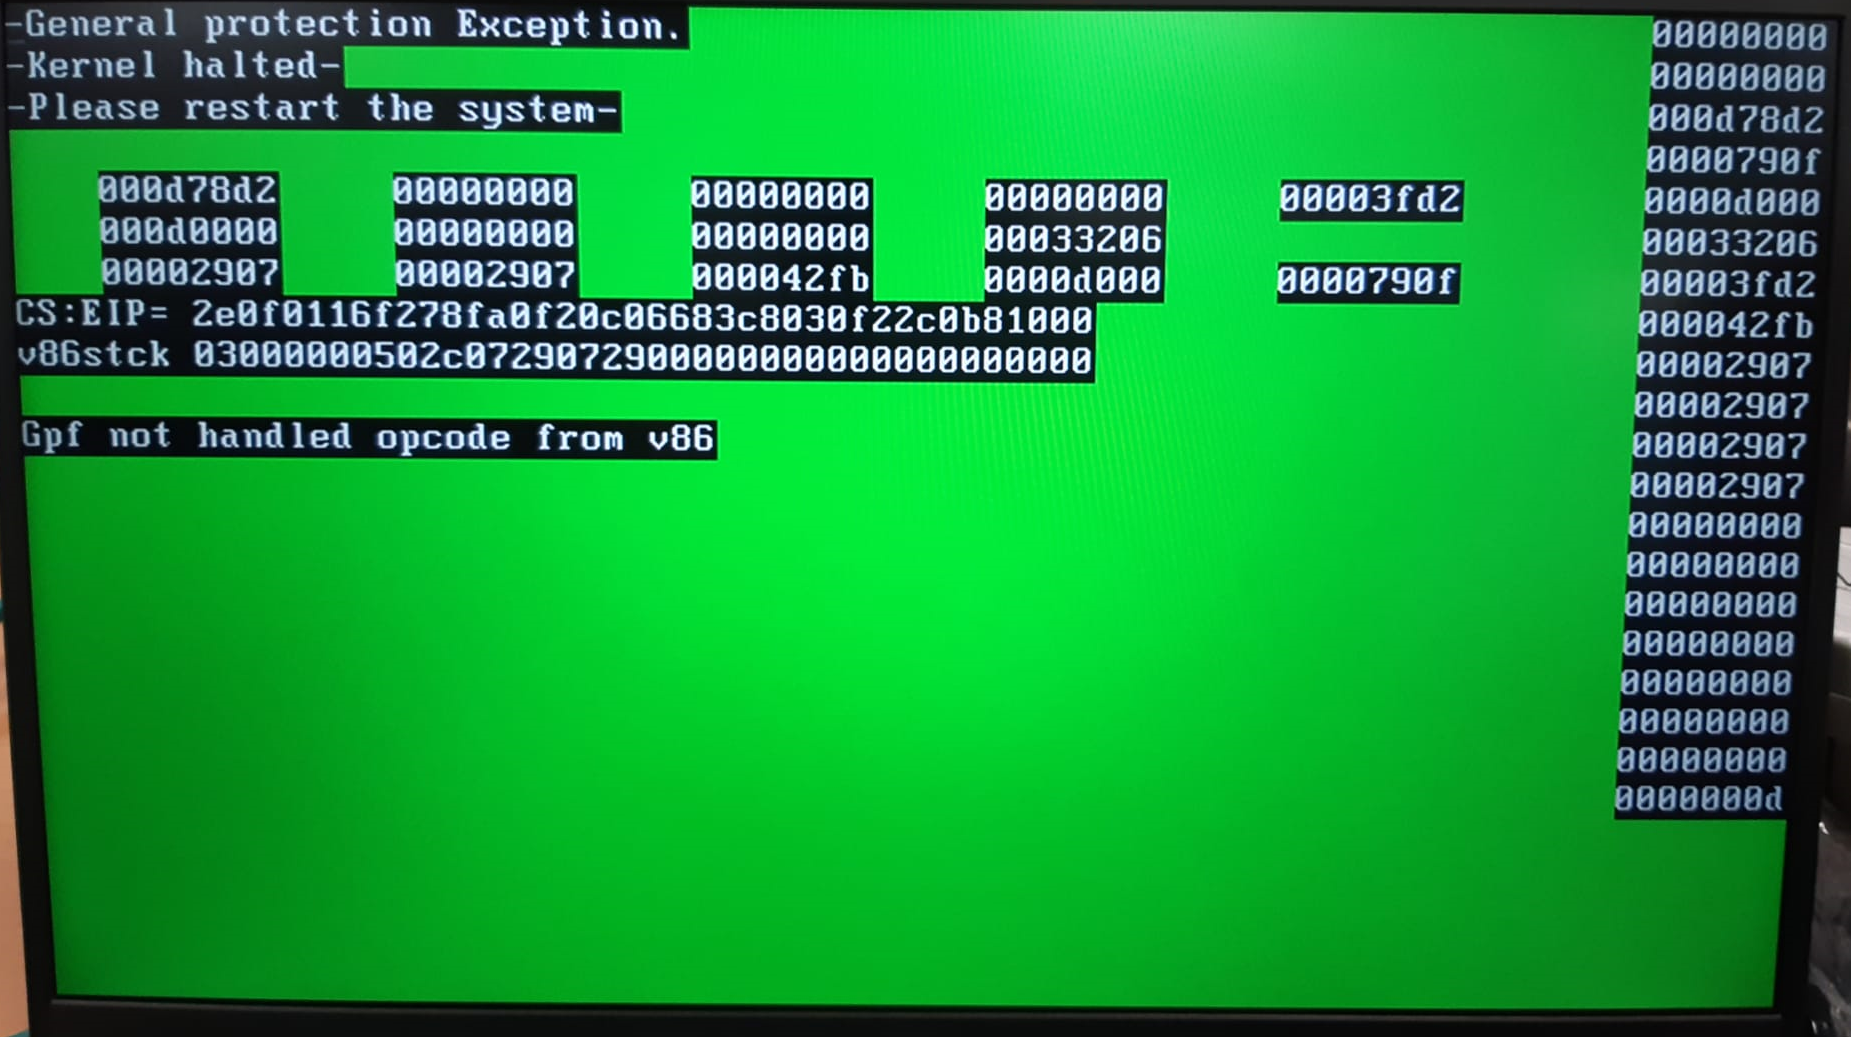 Green Screen "Invalid opcode Exception. Kernel halted" on Lenovo IdeaPad laptop when installing Full Disk Encryption